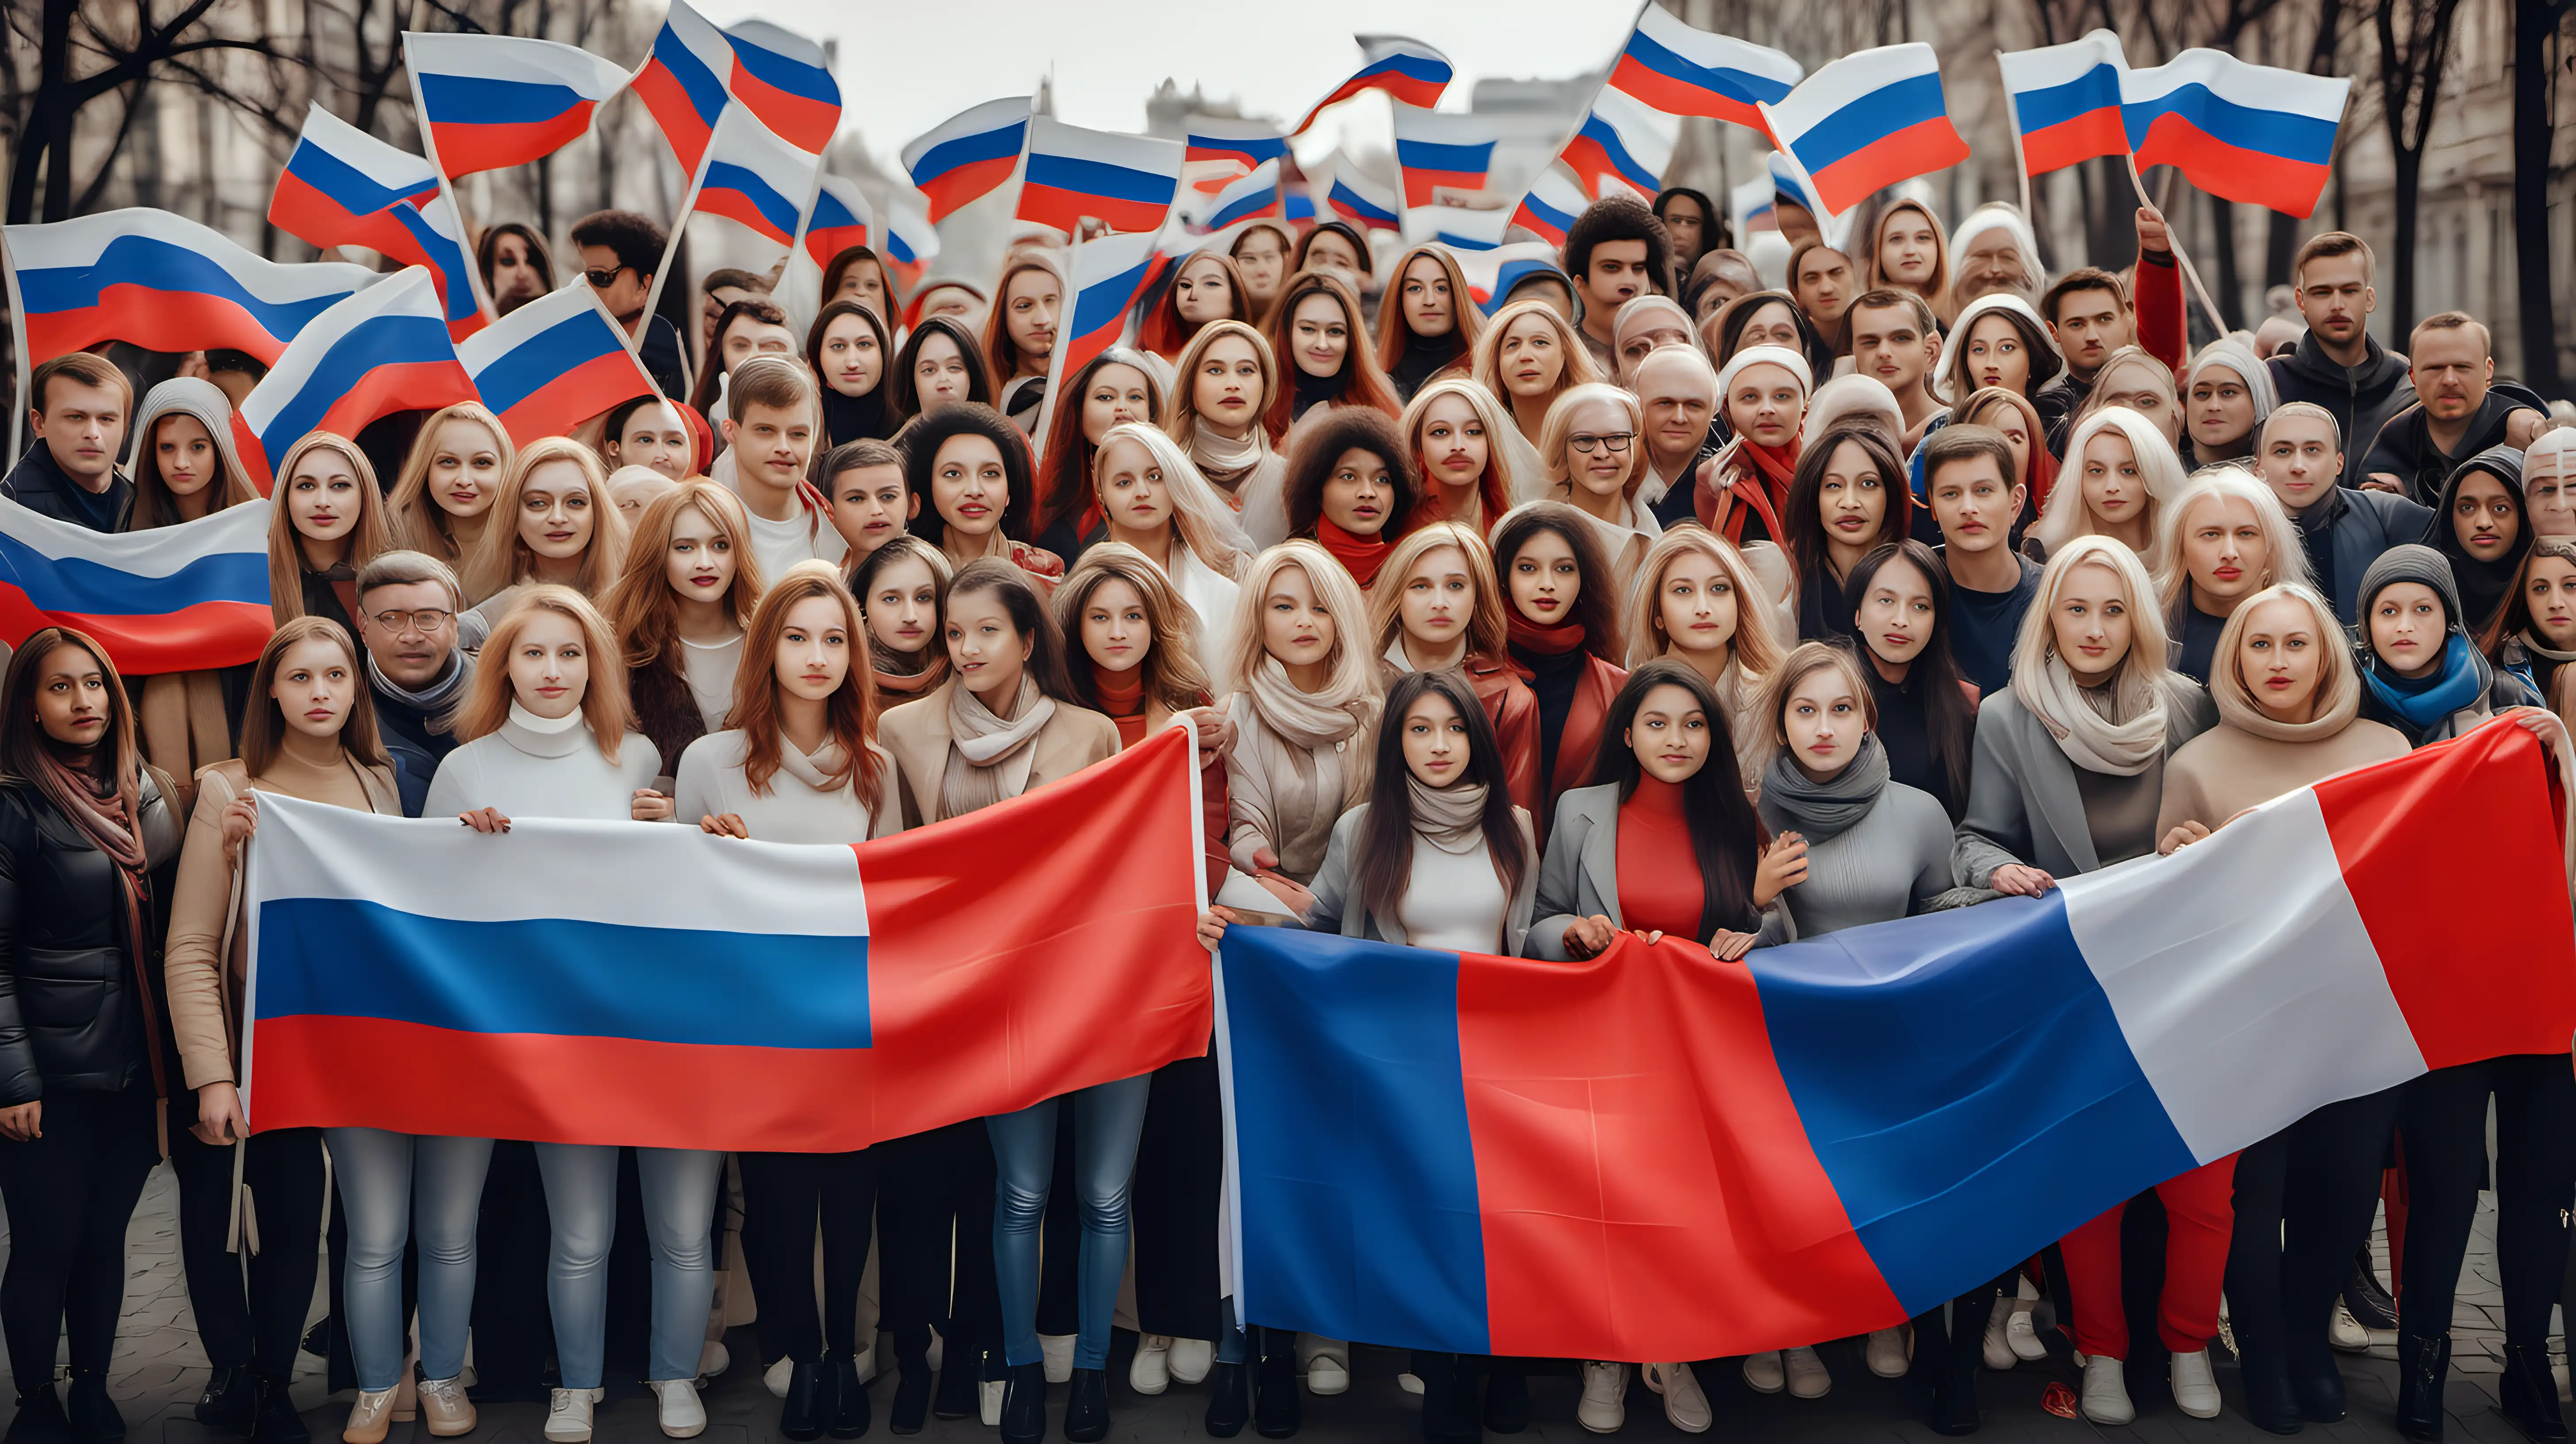 Diverse Group Celebrating Patriotism with Russian Flag